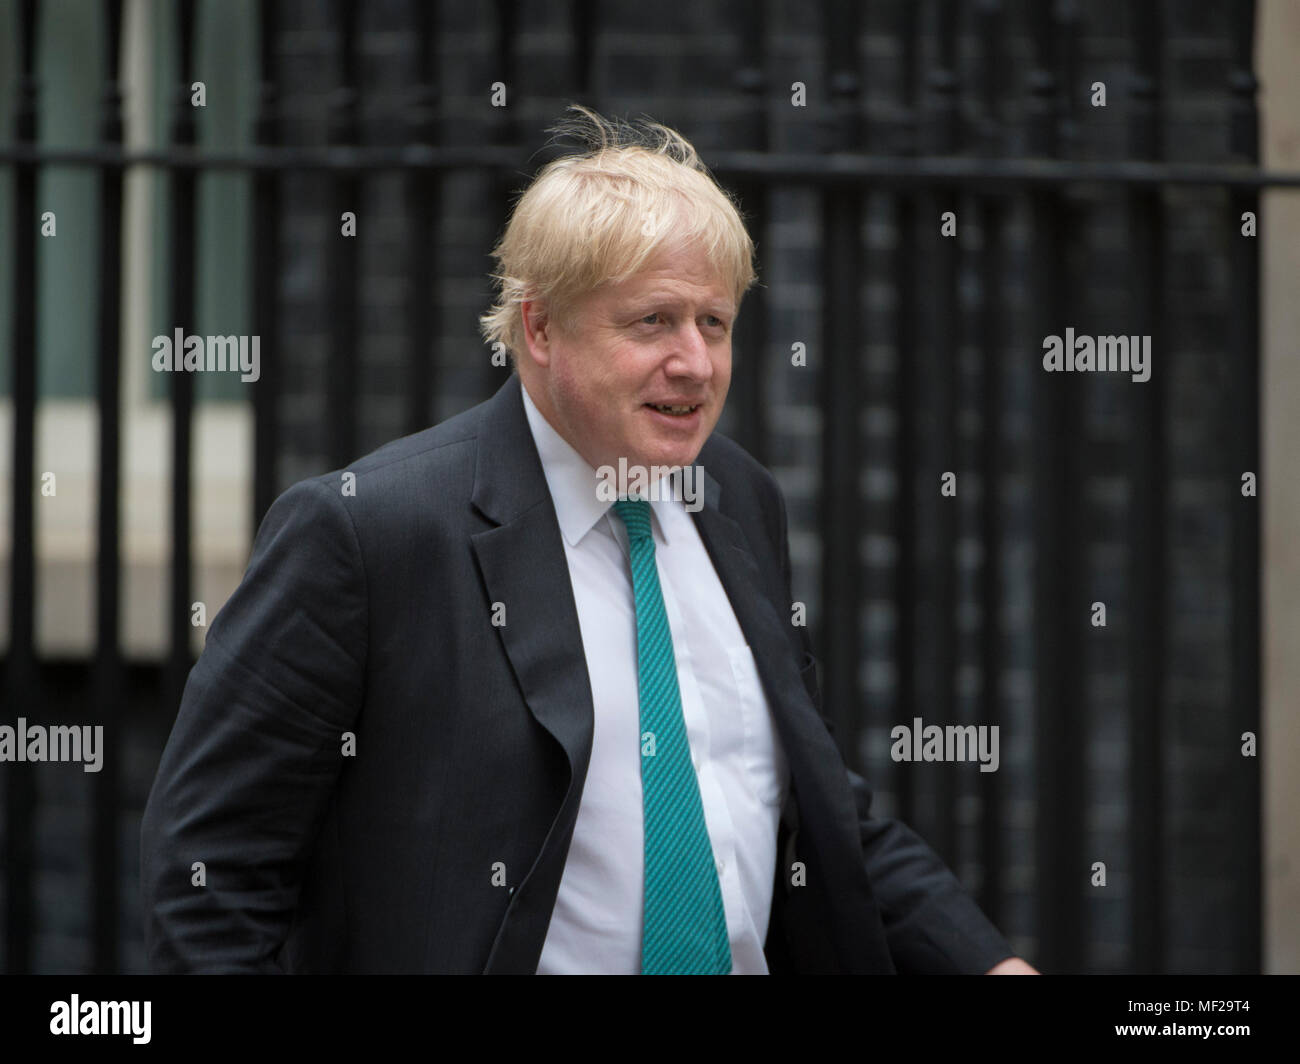 Downing Street, London, UK. 24 April 2018. Boris Johnson, Secretary of State for Foreign and Commonwealth Affairs, Foreign Secretary, in Downing Street for weekly cabinet meeting. Credit: Malcolm Park/Alamy Live News. Stock Photo